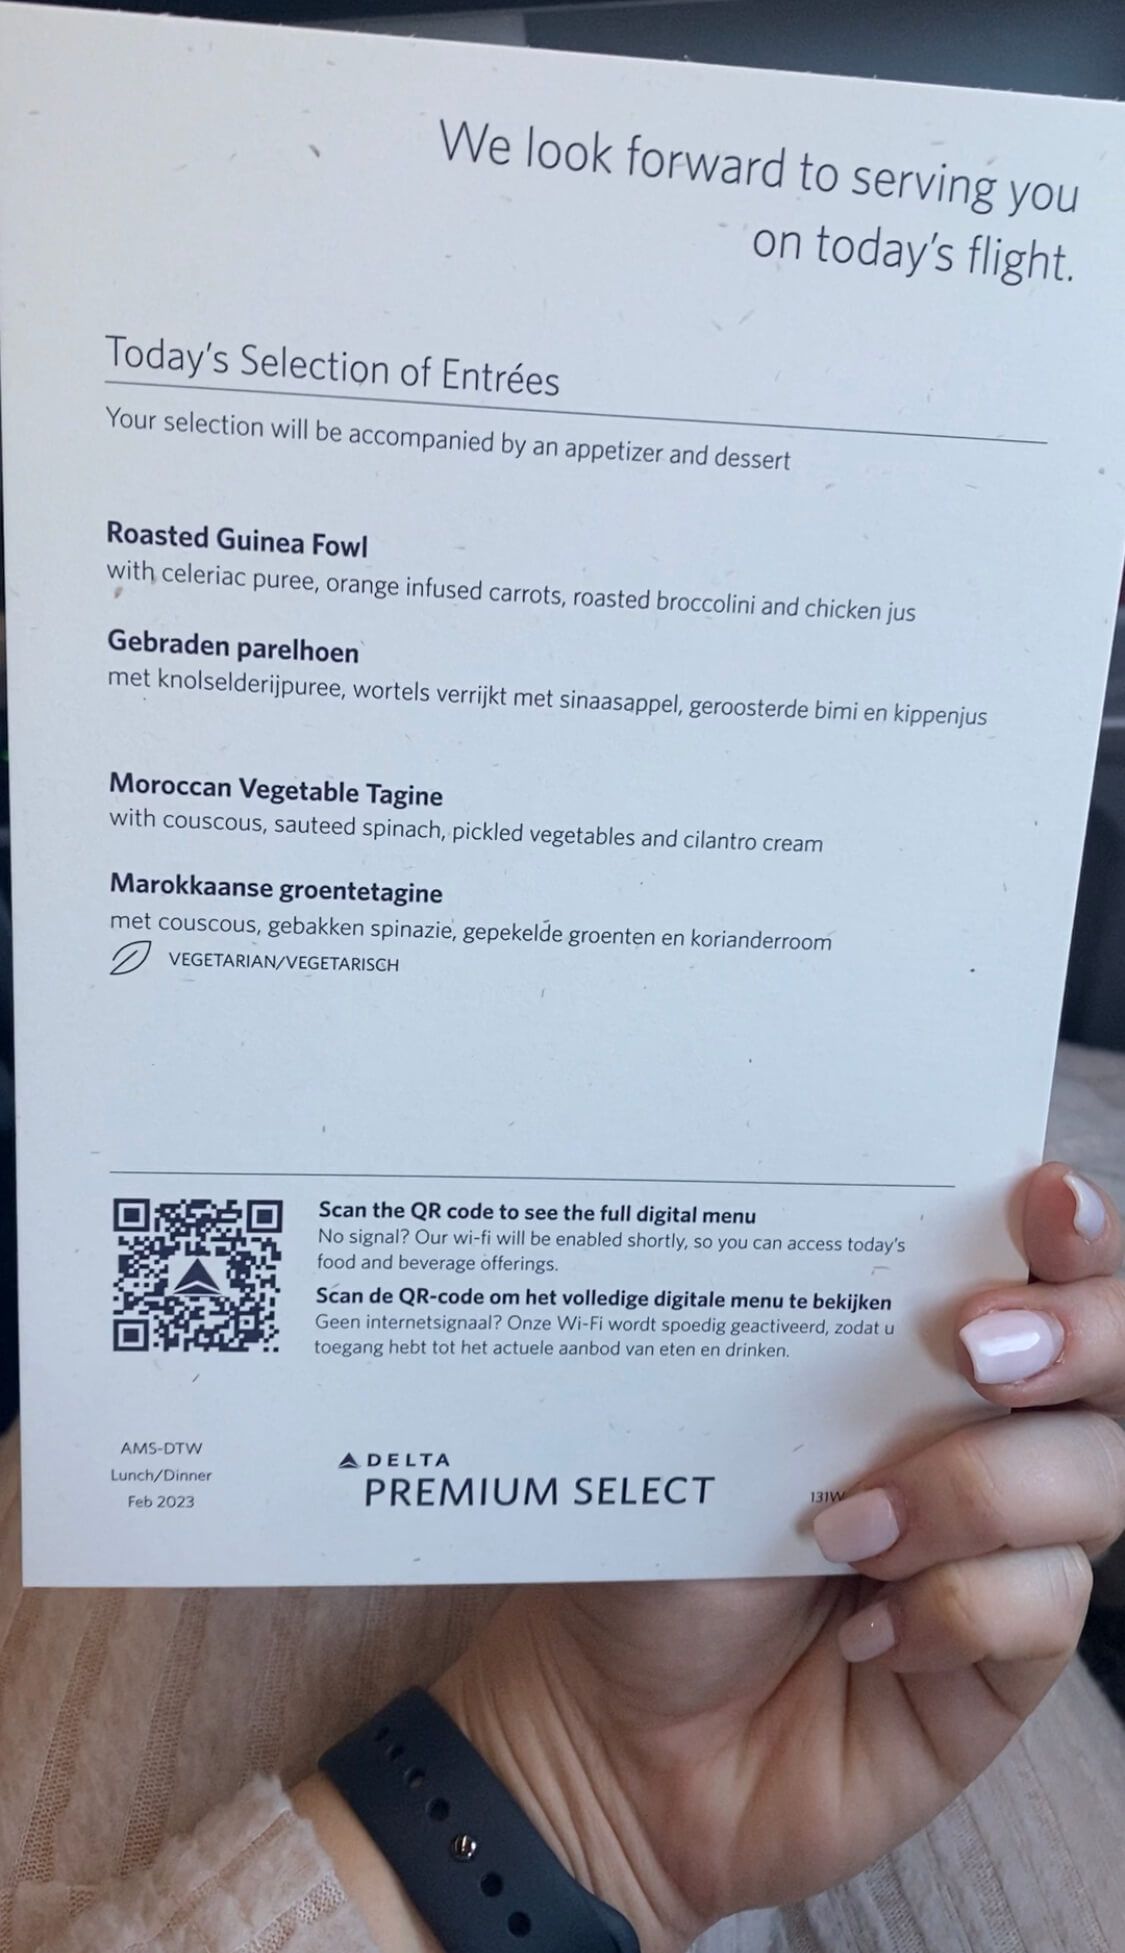 delta premium select lunch menu flight amsterdam to detroit selection of entrees and QR code for full menu